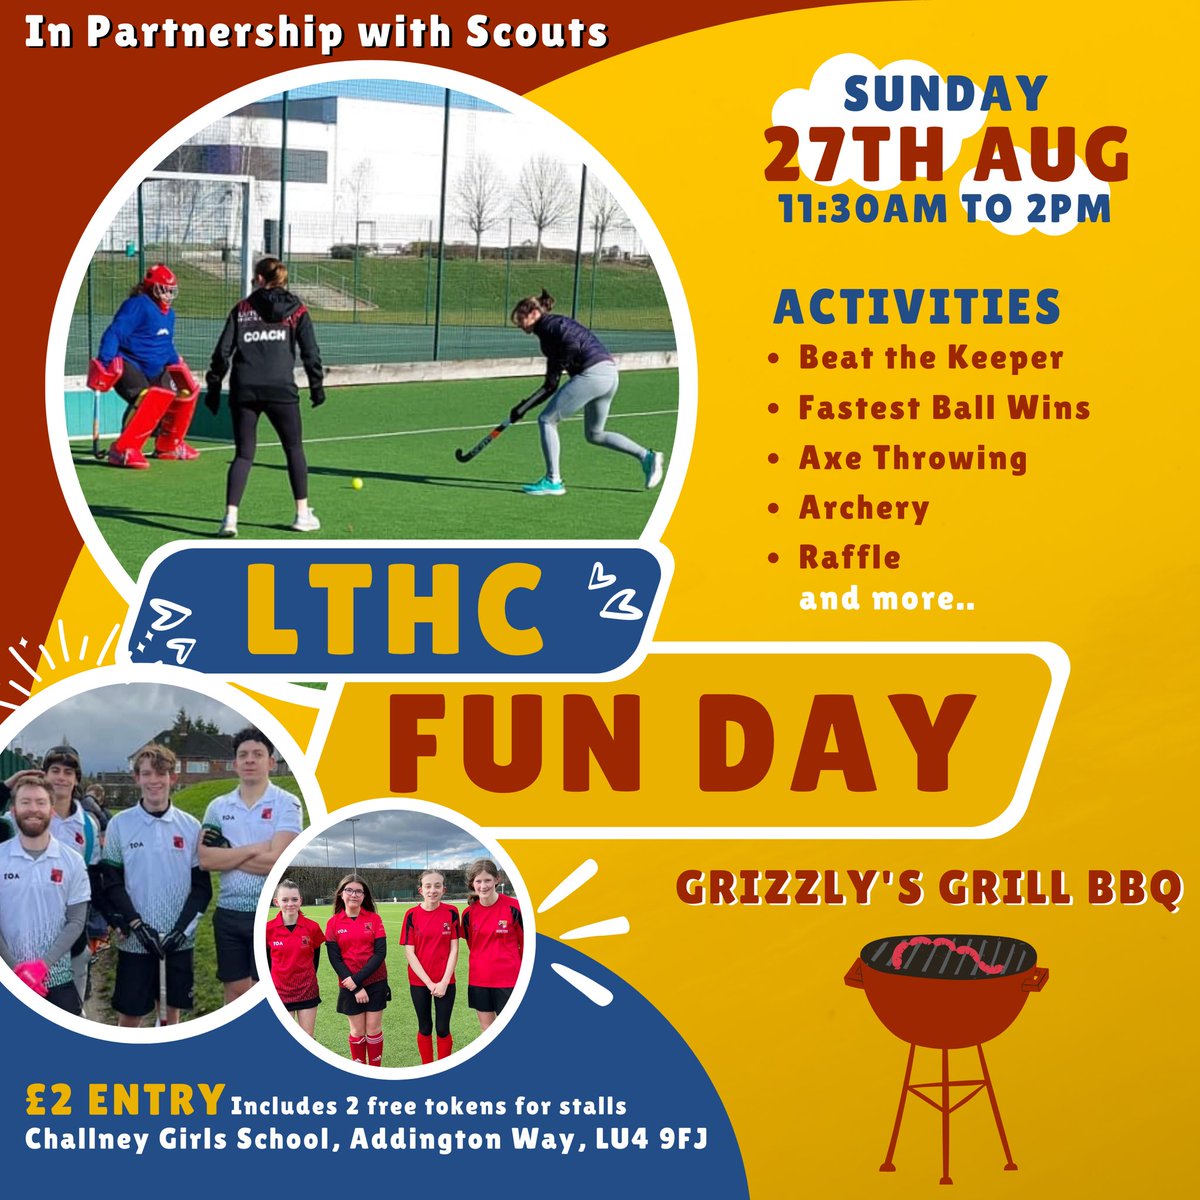 LTHC Fun Day 2023 in partnership with Scouts. Join us at Challney Girls School on Sunday 27th August from 11:30am to 2pm for an afternoon full of food & activities including Axe throwing, beat the keeper, fastest ball wins & more. £2 entry that includes 2 free tokens.